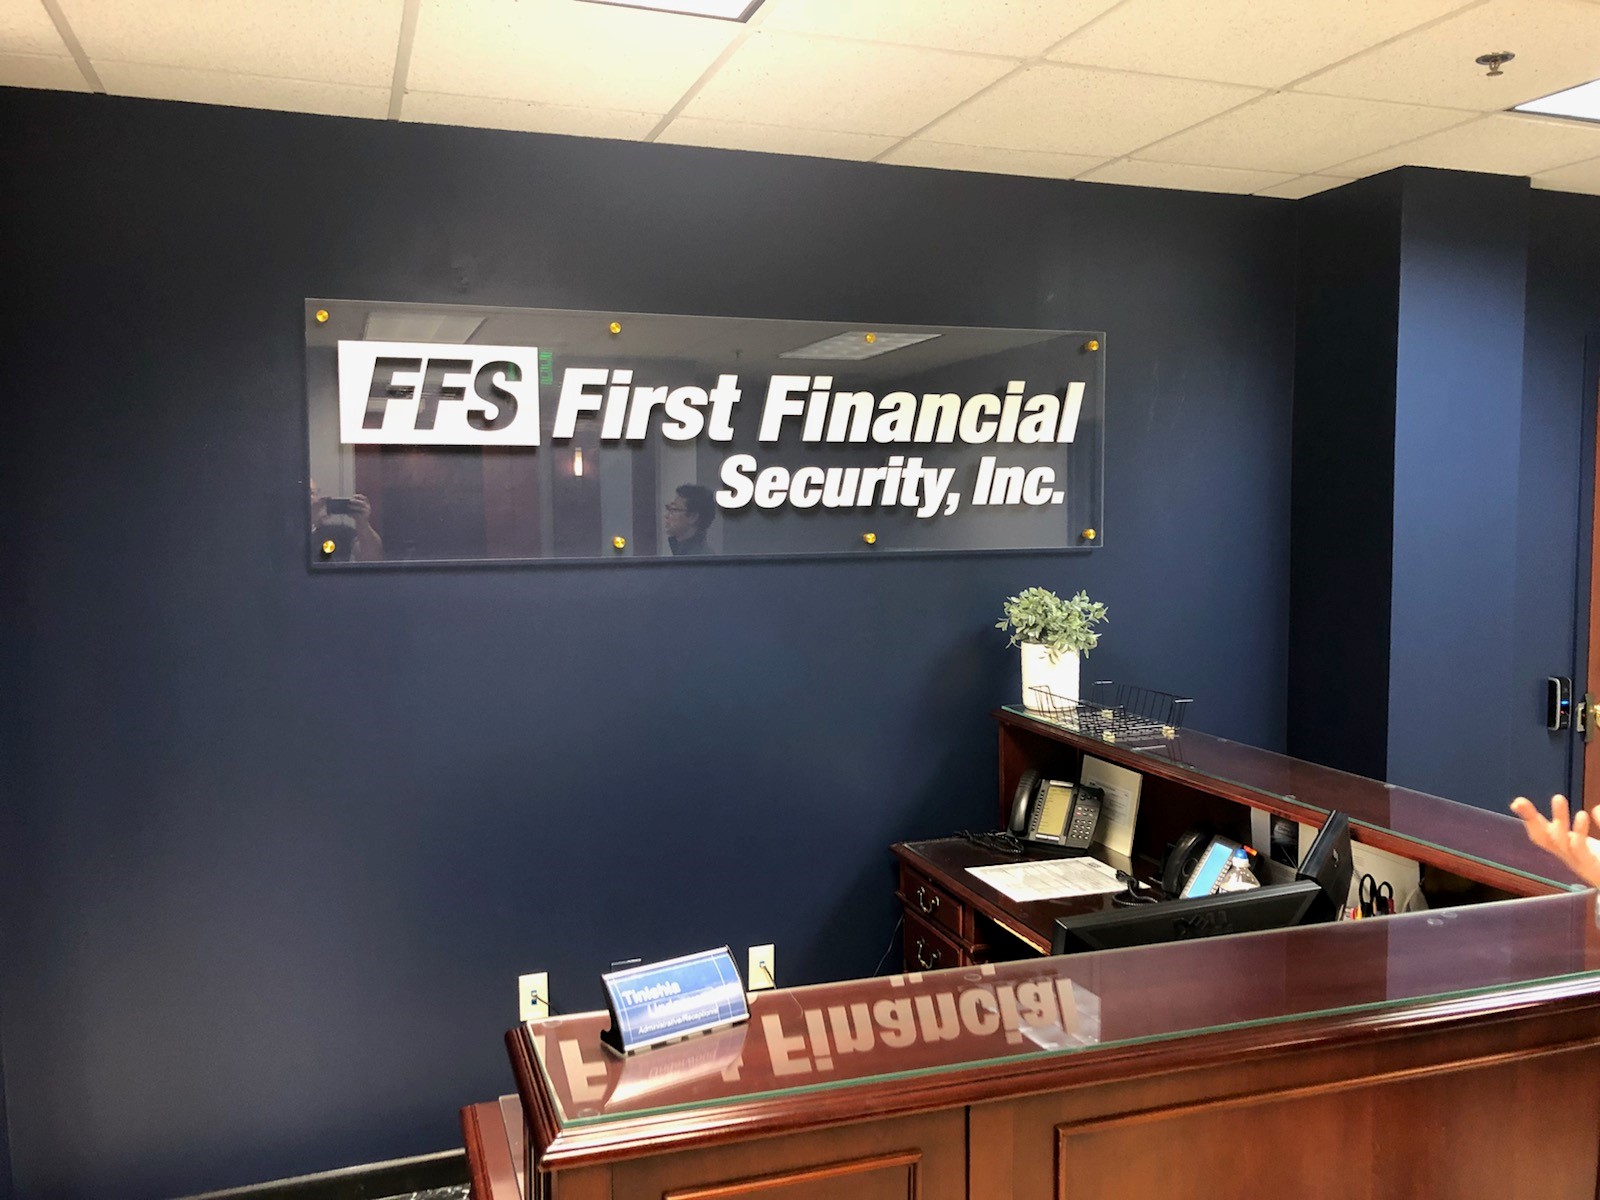 First Financial Security, Inc. acrylic sign